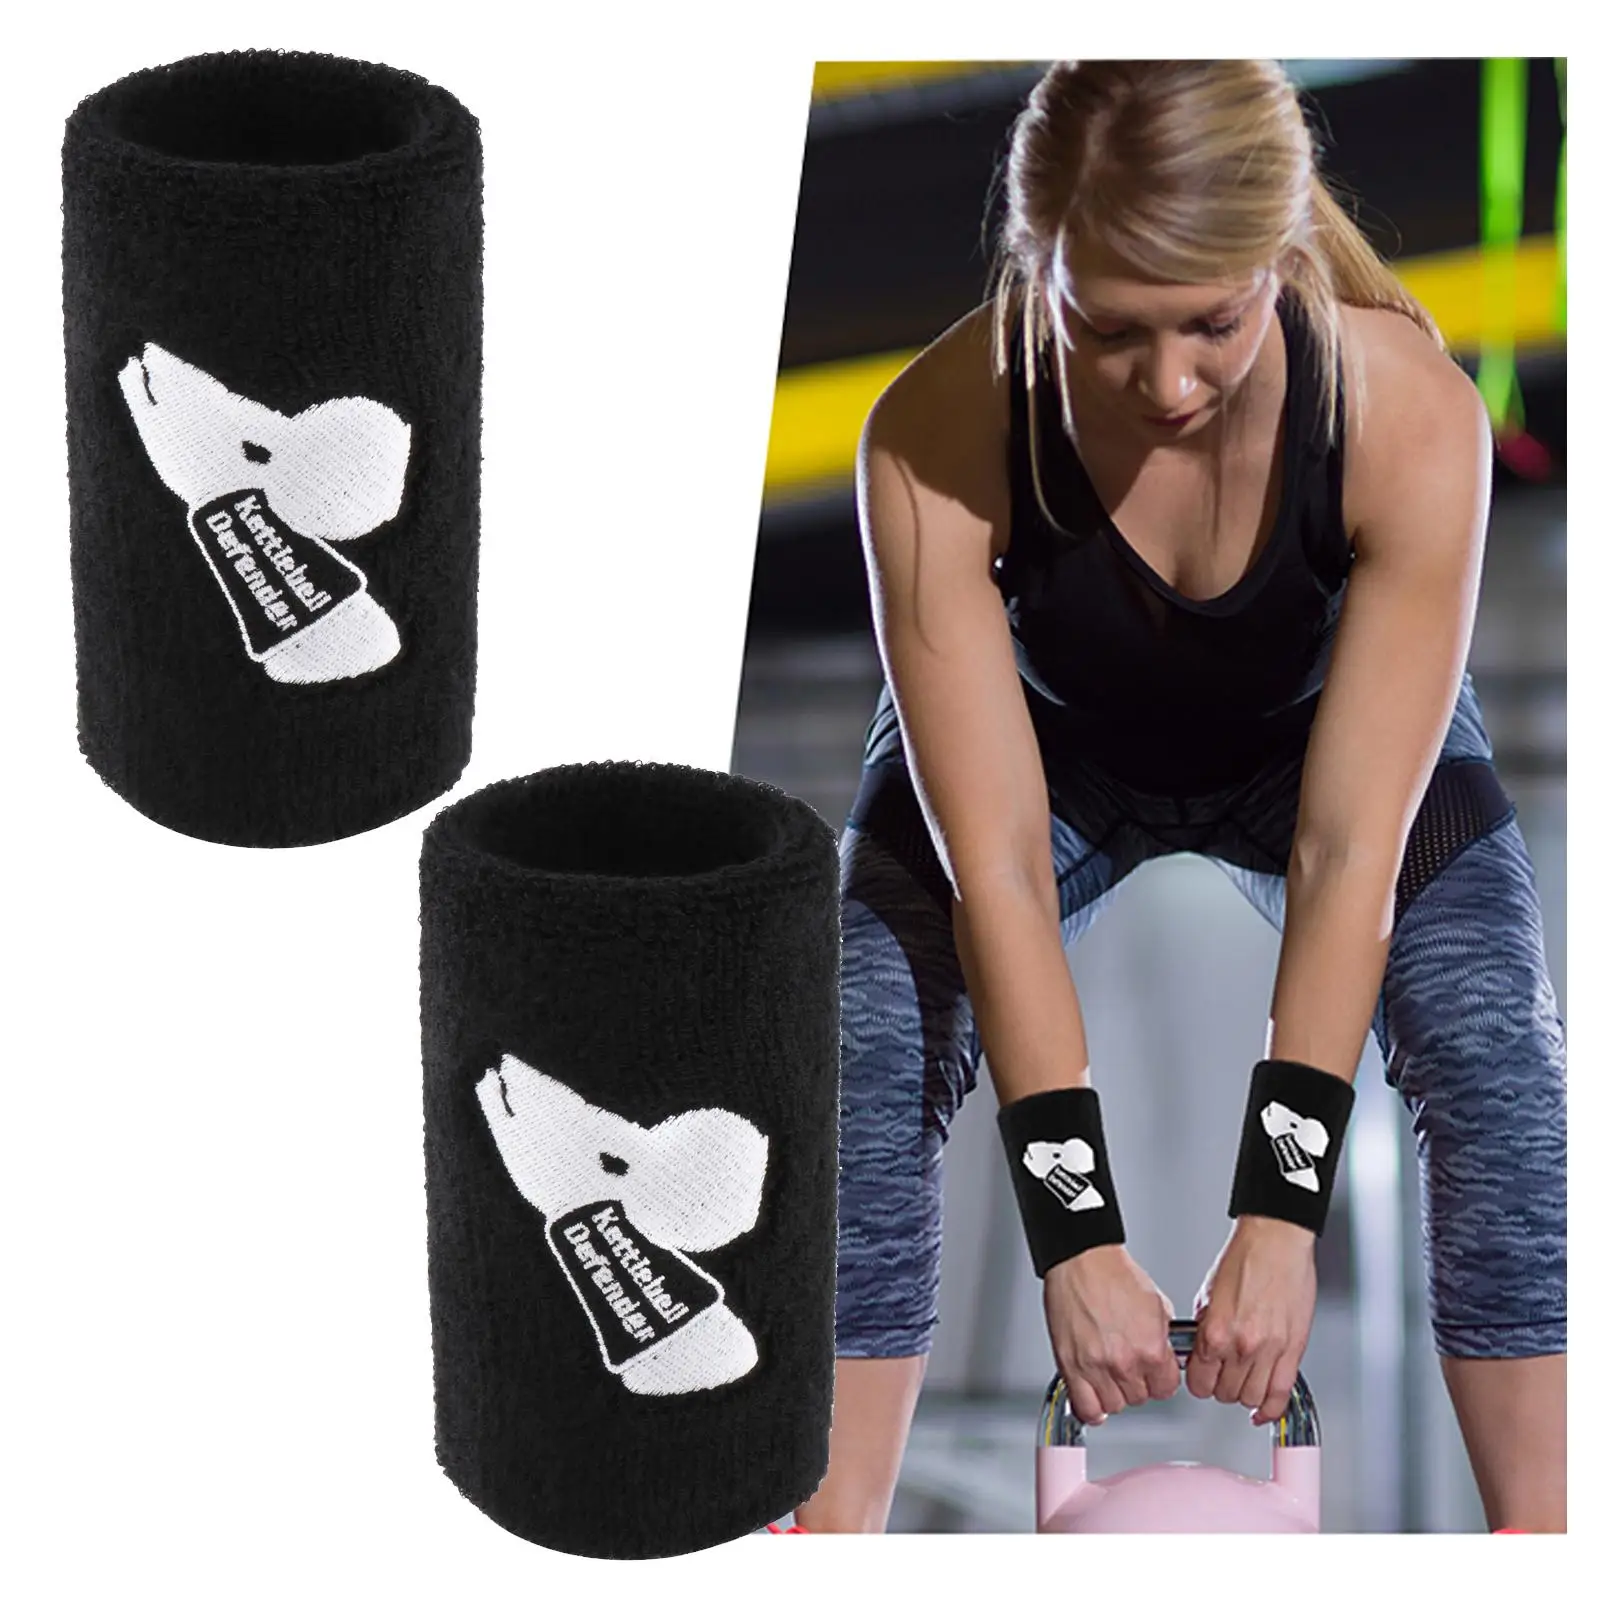 2 Pieces Breathable Kettlebell Wrist Guards Elastic Wristband Provides Support Forearm Protector for Men Women Avoid Injury